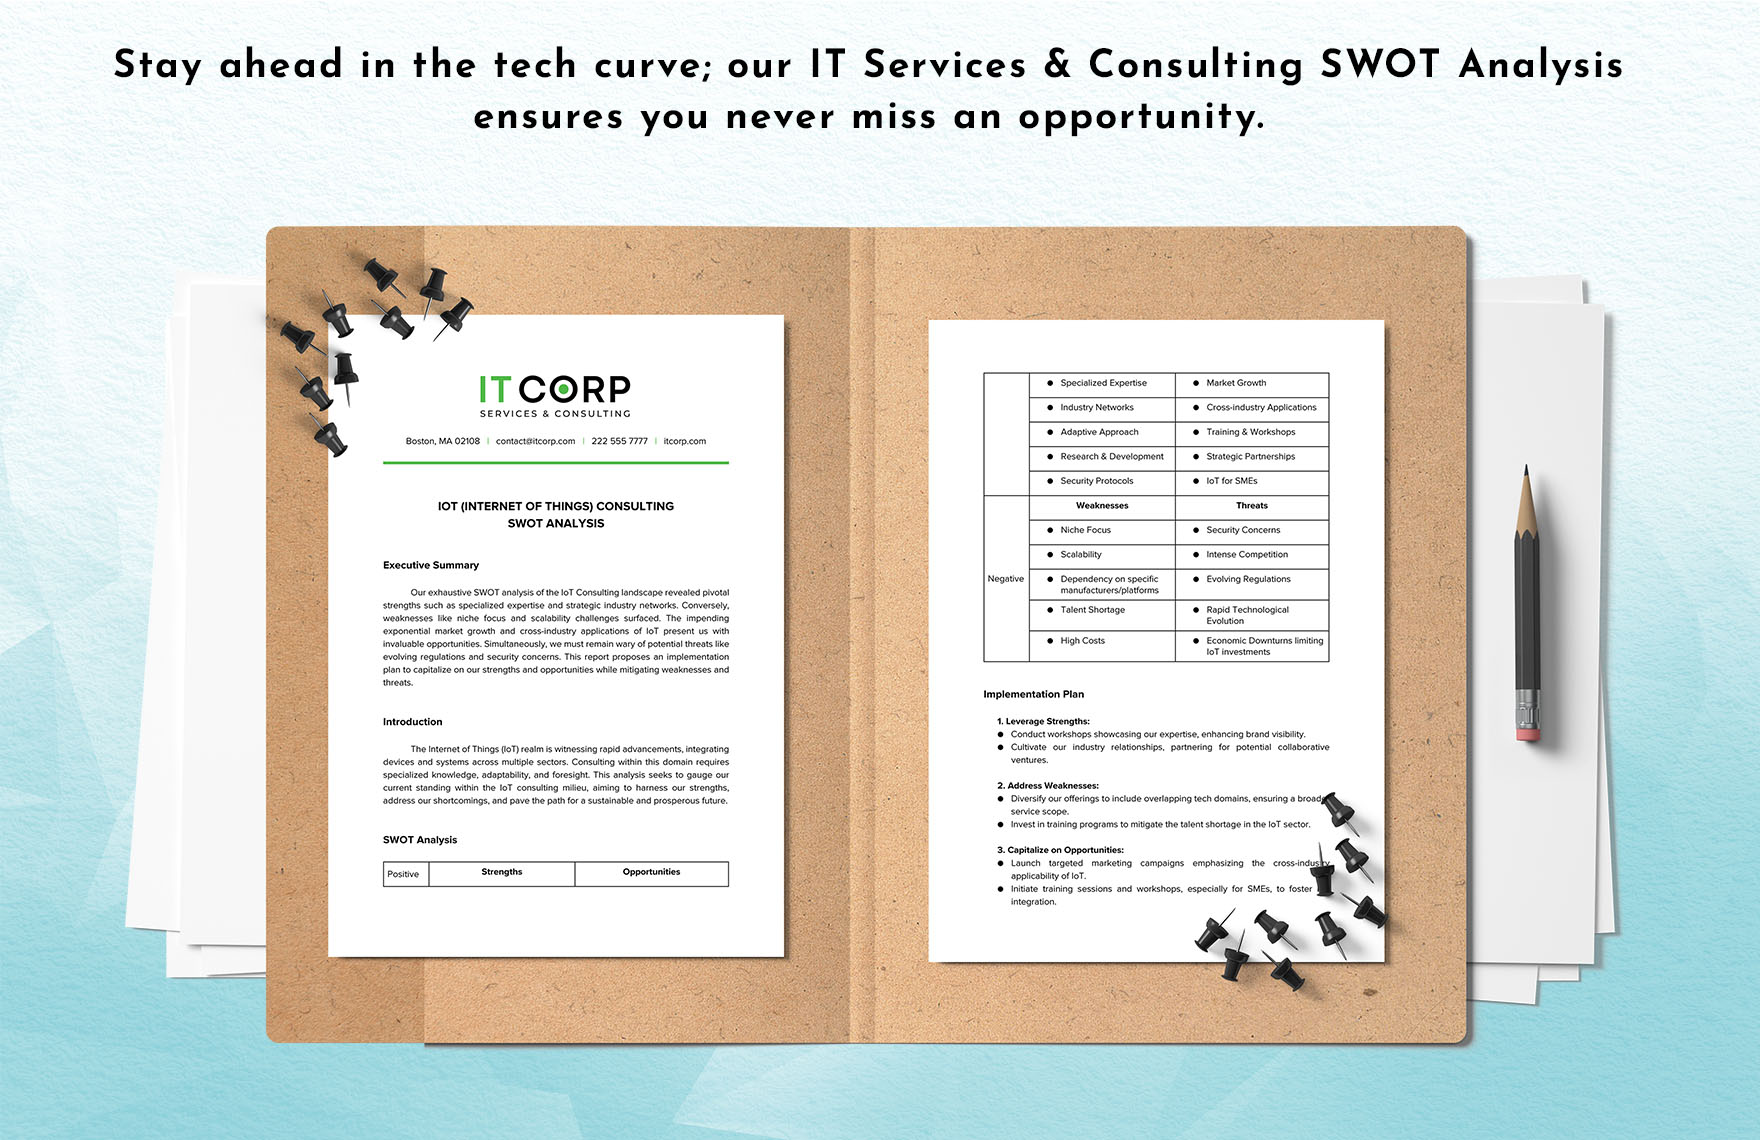 IoT (Internet of Things) Consulting SWOT Analysis Template